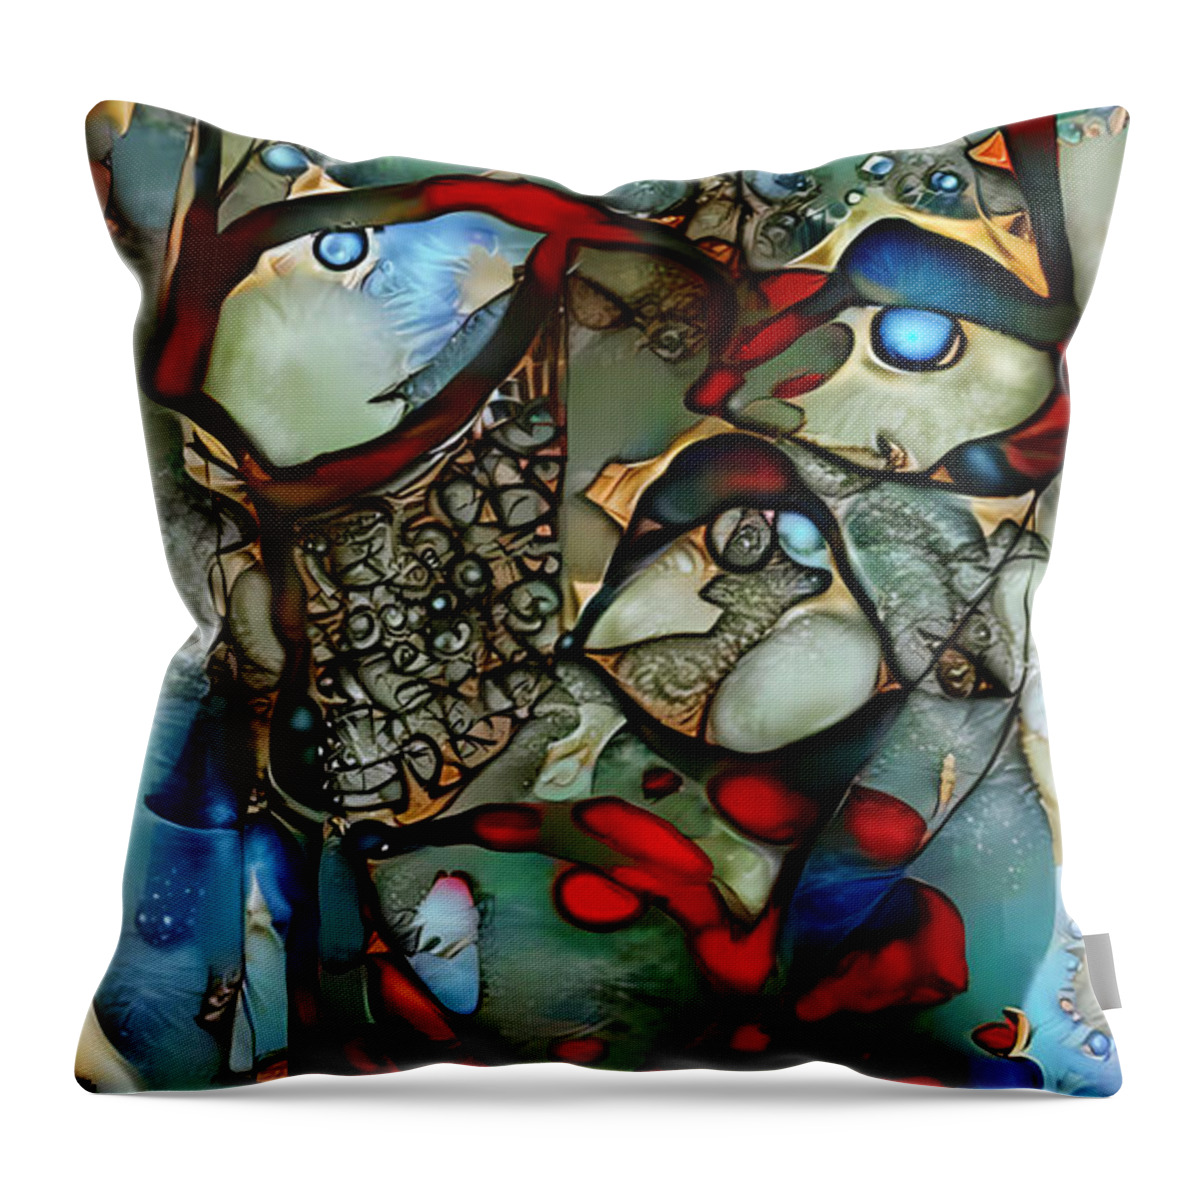 Contemporary Art Throw Pillow featuring the digital art 46 by Jeremiah Ray